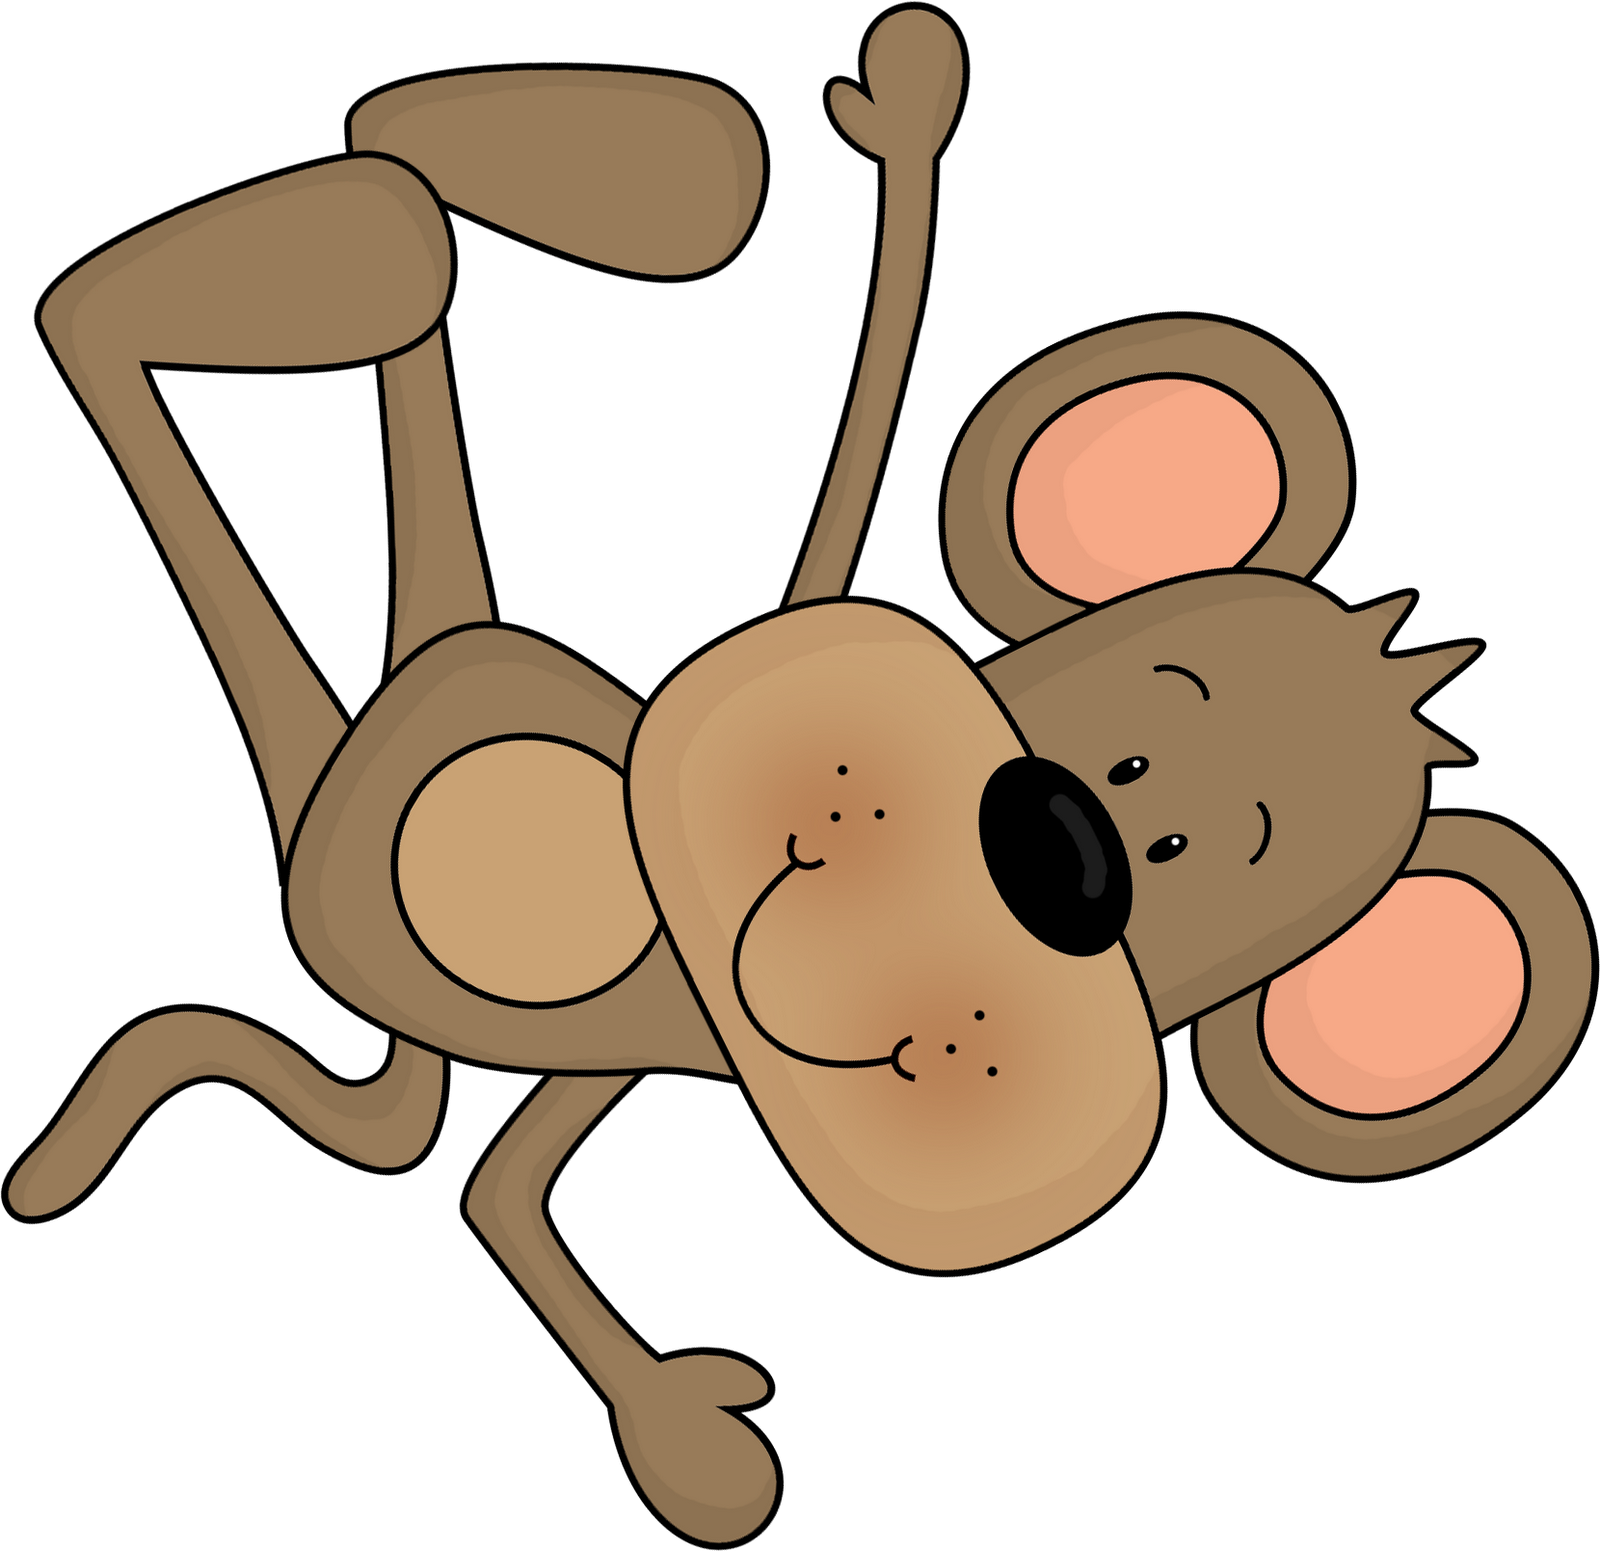 Free monkey clipart | Clipart Panda - Free Clipart Images